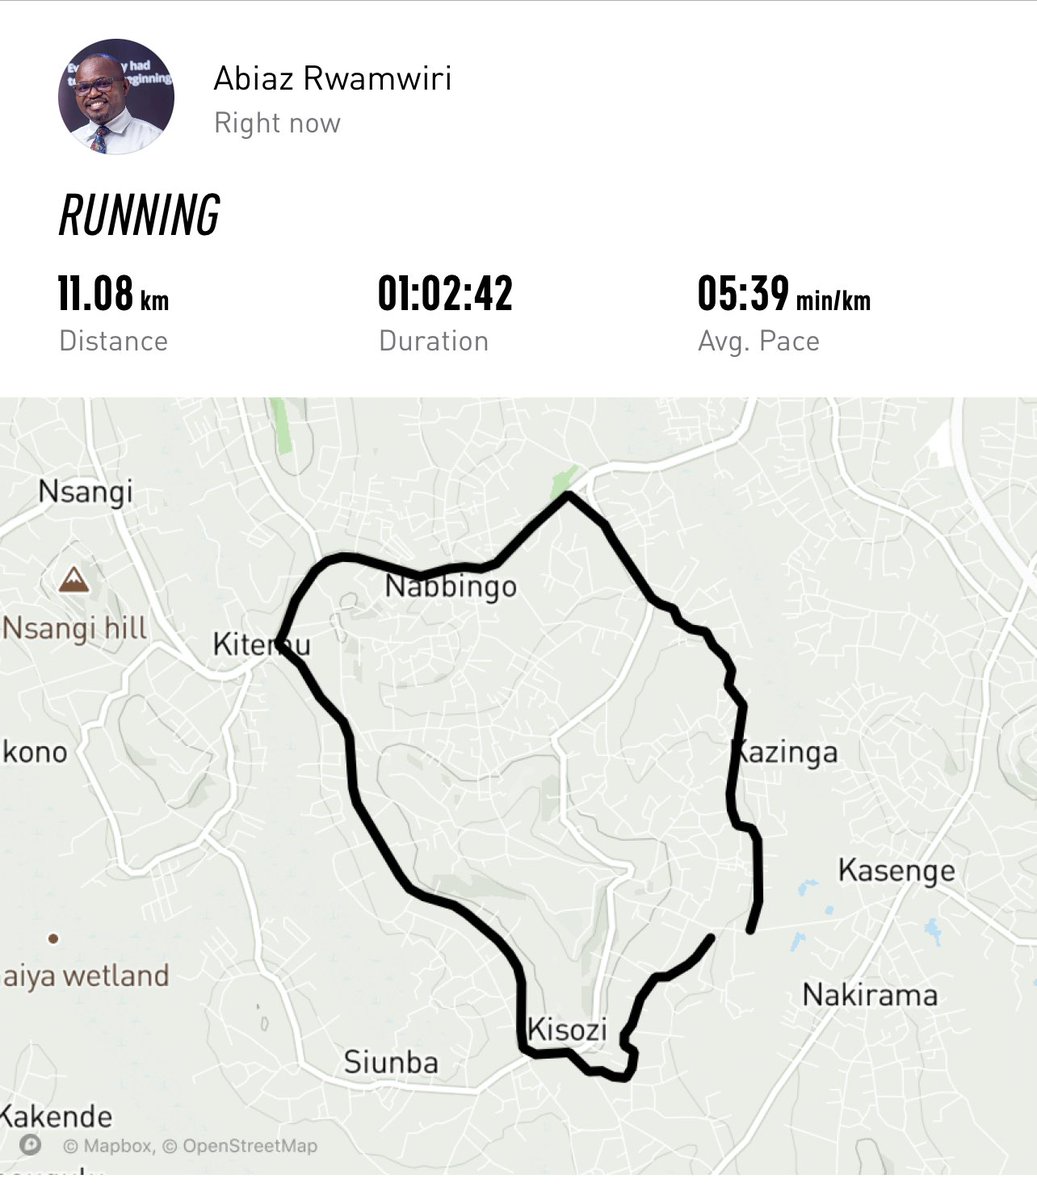 I told @Comrade_Otoa that I will choose to count my blessings as I wait on being counted. One of the key blessings is the good health that I don’t take for granted and therefore I keep adding some fuel to keep healthier. I went for a short but fast run around the village.